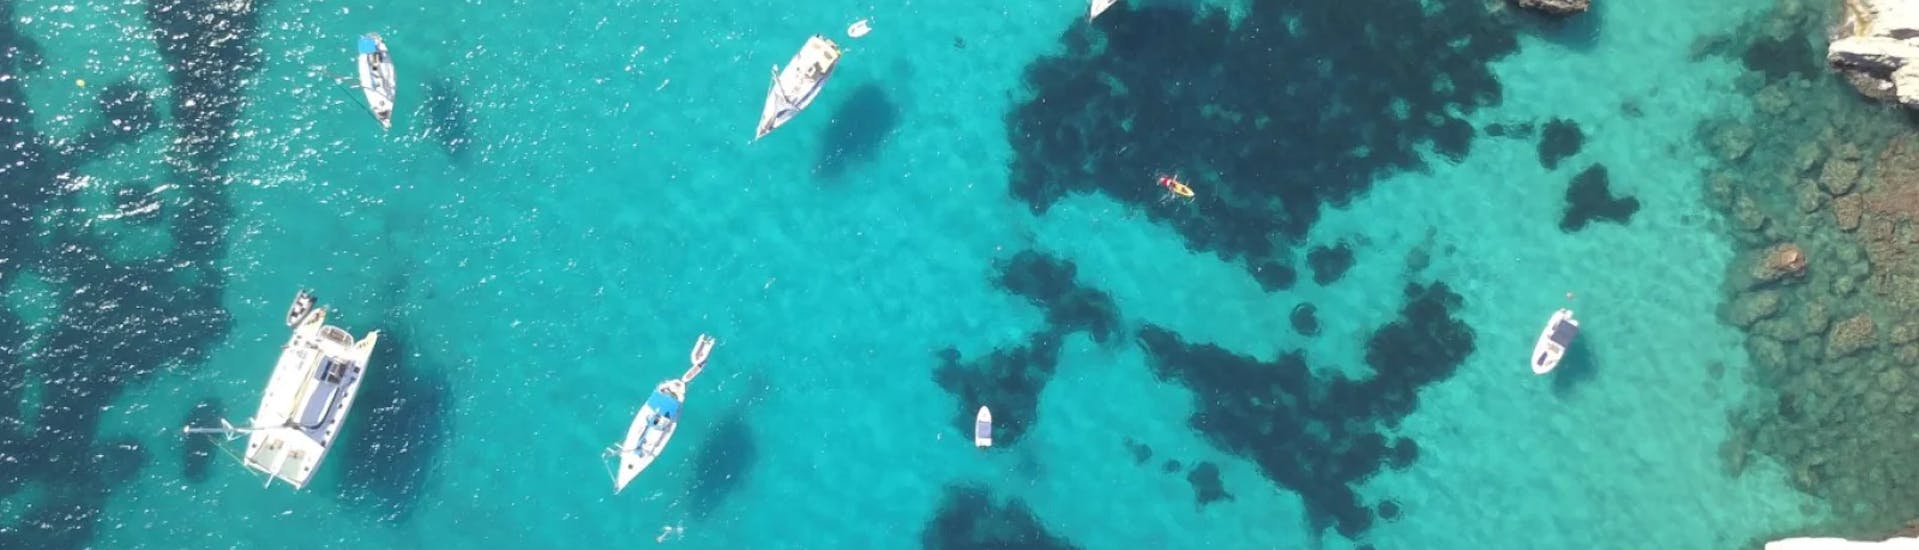 Bird's-eye view of boats in turquoise water, wher you will stop during your Full Day Boat trip from Ibiza Town to Es Vedrá & Formentera with Paella & Sunset with Excursiones Ibiza.